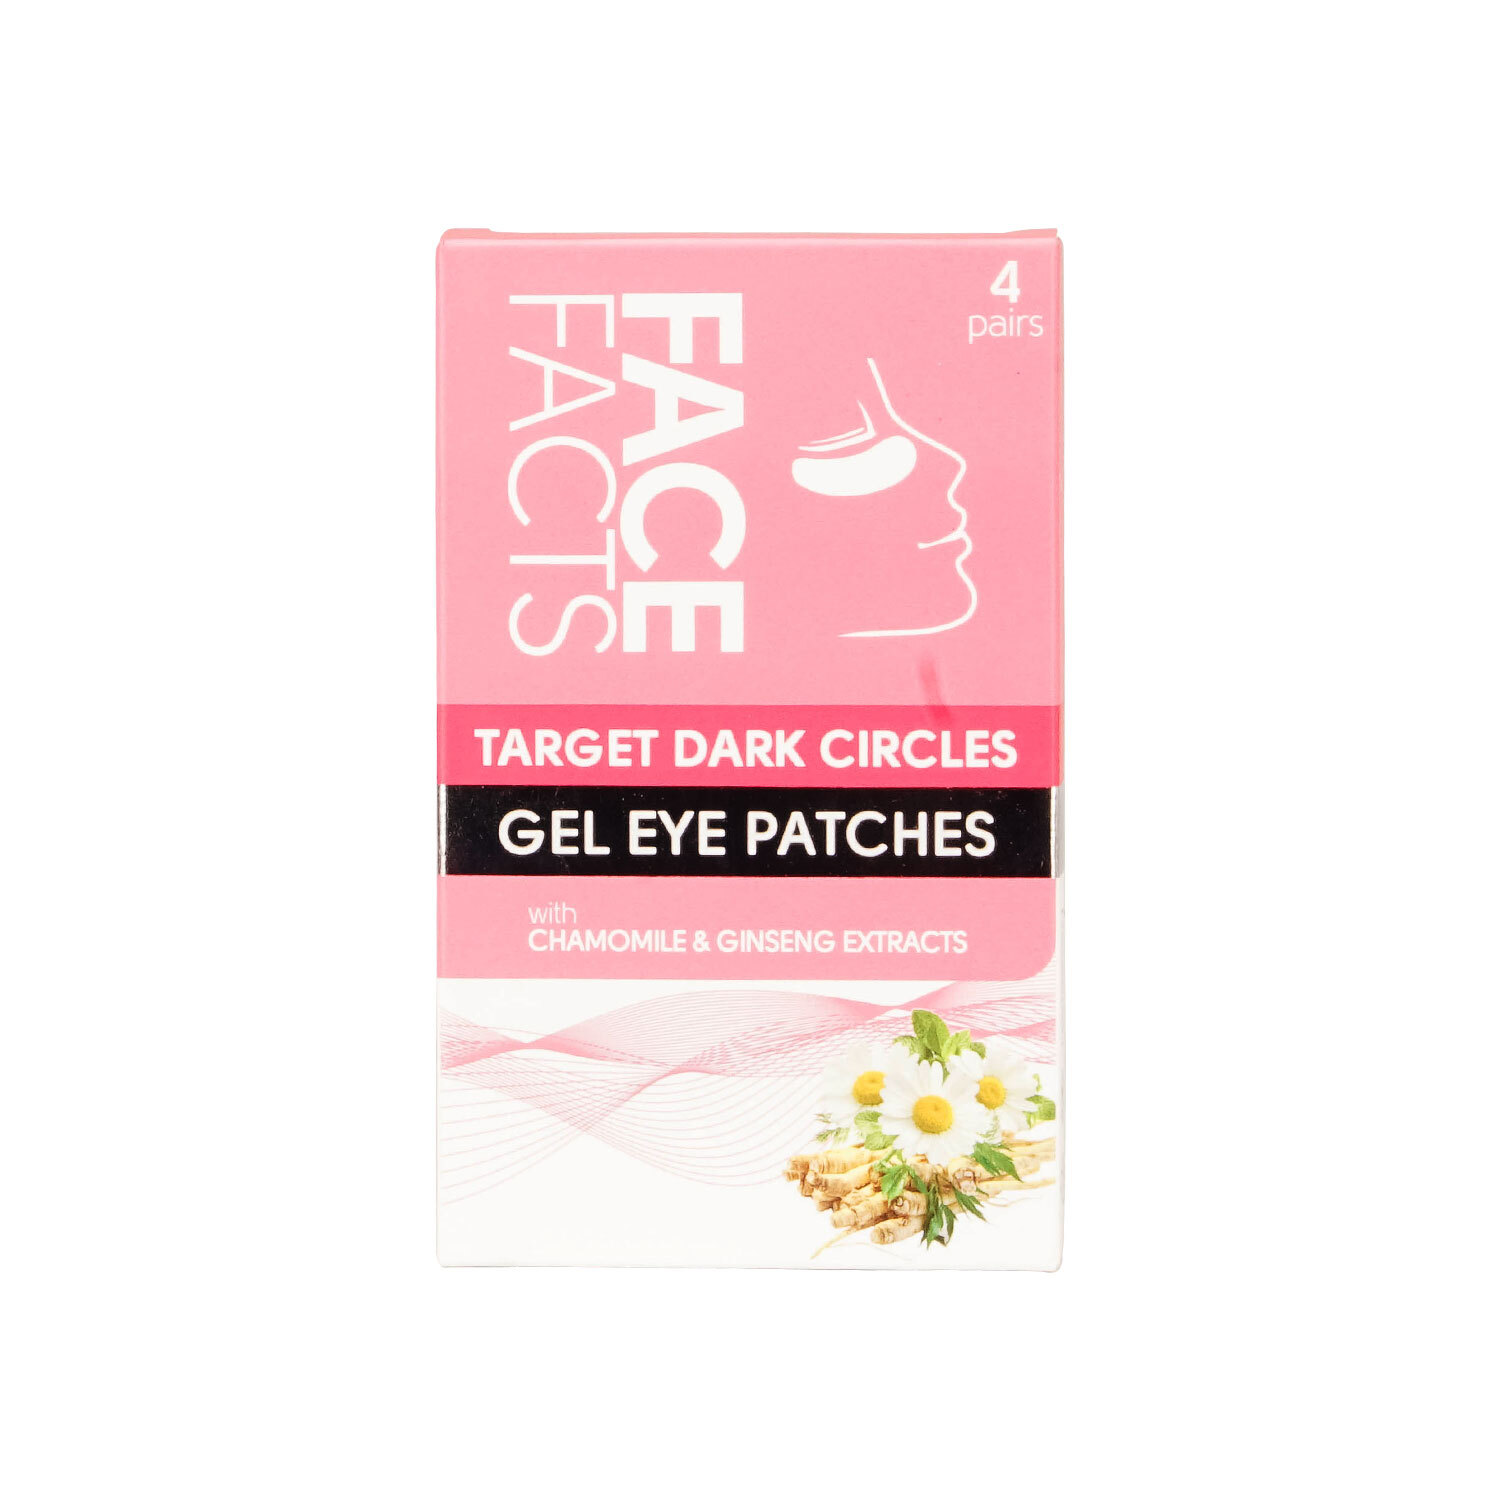 Face Facts Dark Circles Gel Eye Patches 4 Pack Image